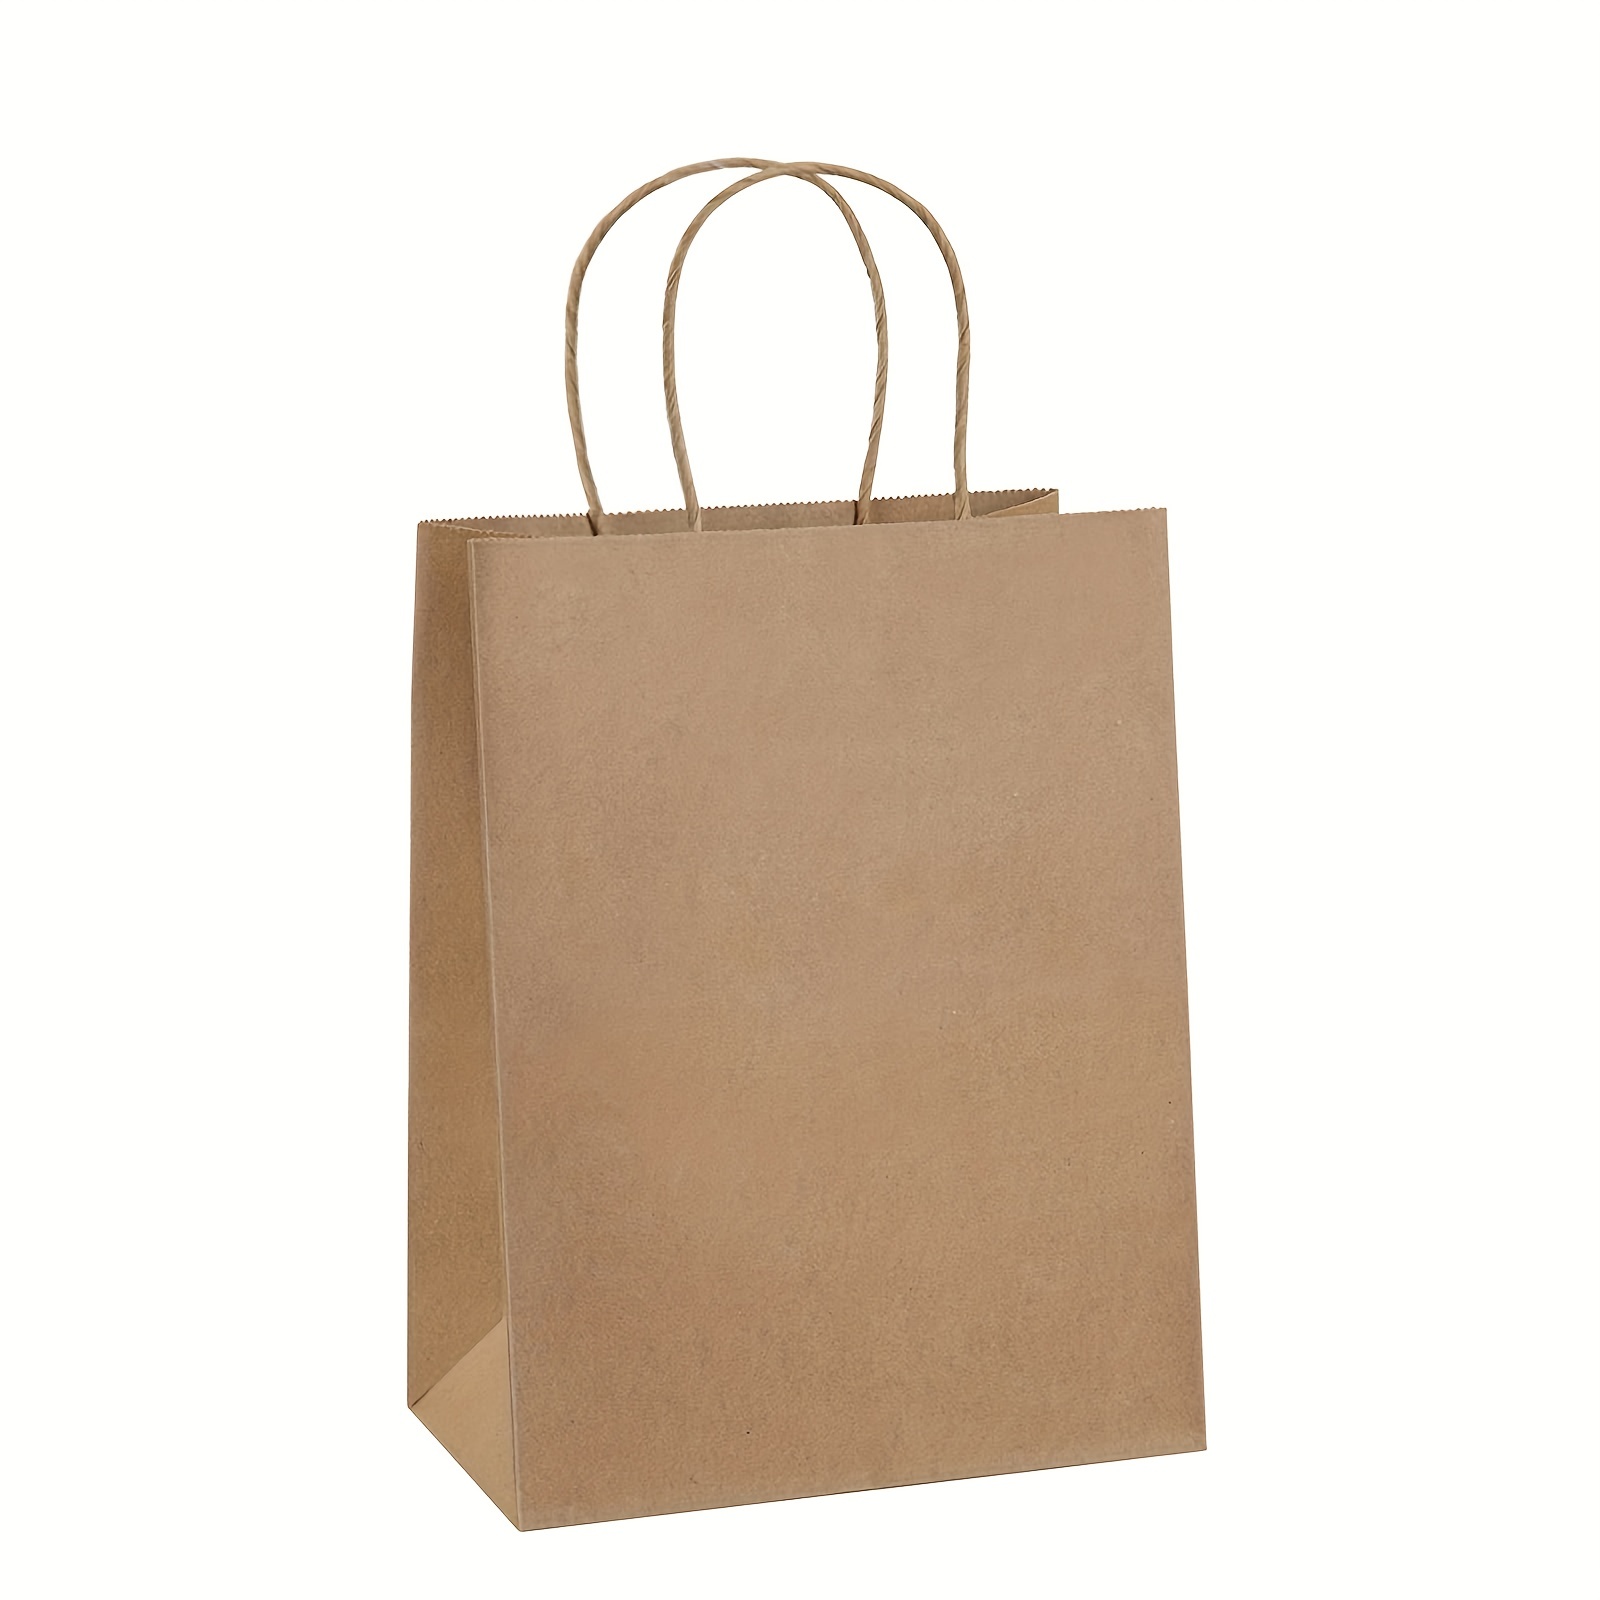 10/20/50/100pcs Multicolor Kraft Paper Bag with Handle Paper Bags for  Packaging Gift Festival Christmas Wedding Birthday Party